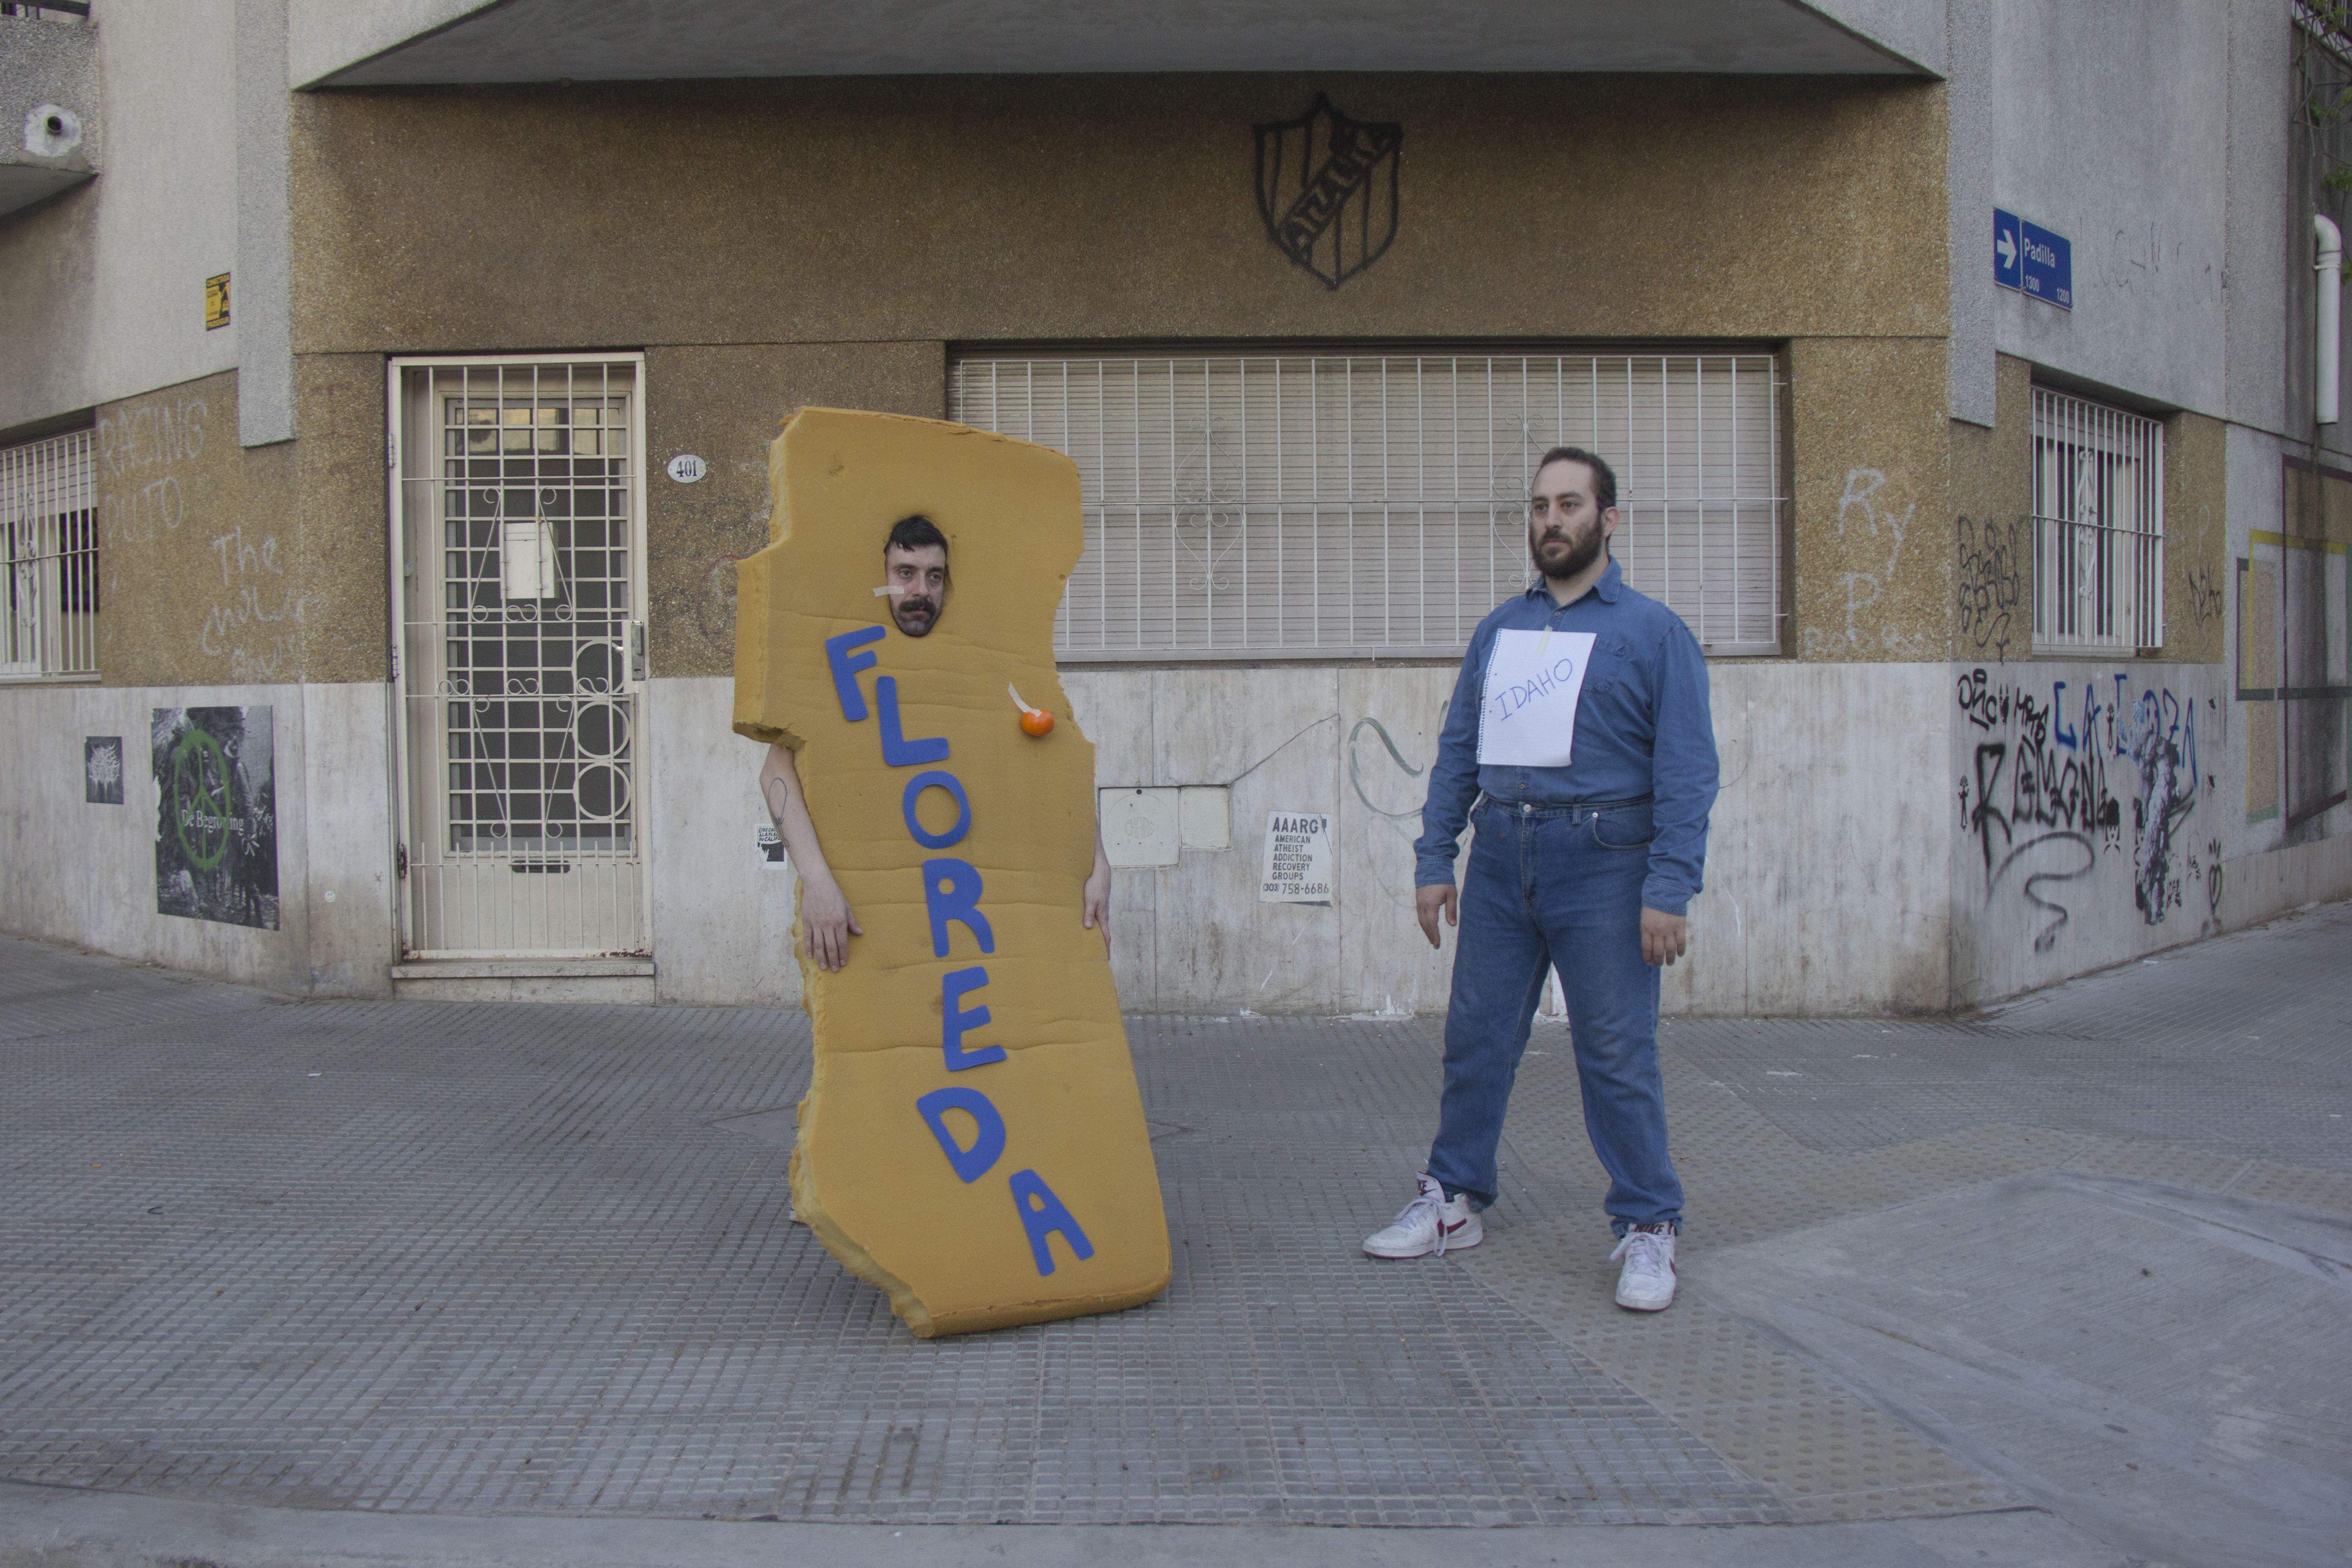 This is an exterior photo of a concrete building with metal bars over the windows and some graffiti. In the foreground there are two figures: one White man with a mustache wearing a large foam costume with the text “FLOREDA” spelled out on it in blue block letters. The other White man wears a beard, an all denim outfit, and has a white piece of paper on his shirt that says “IDAHO.”